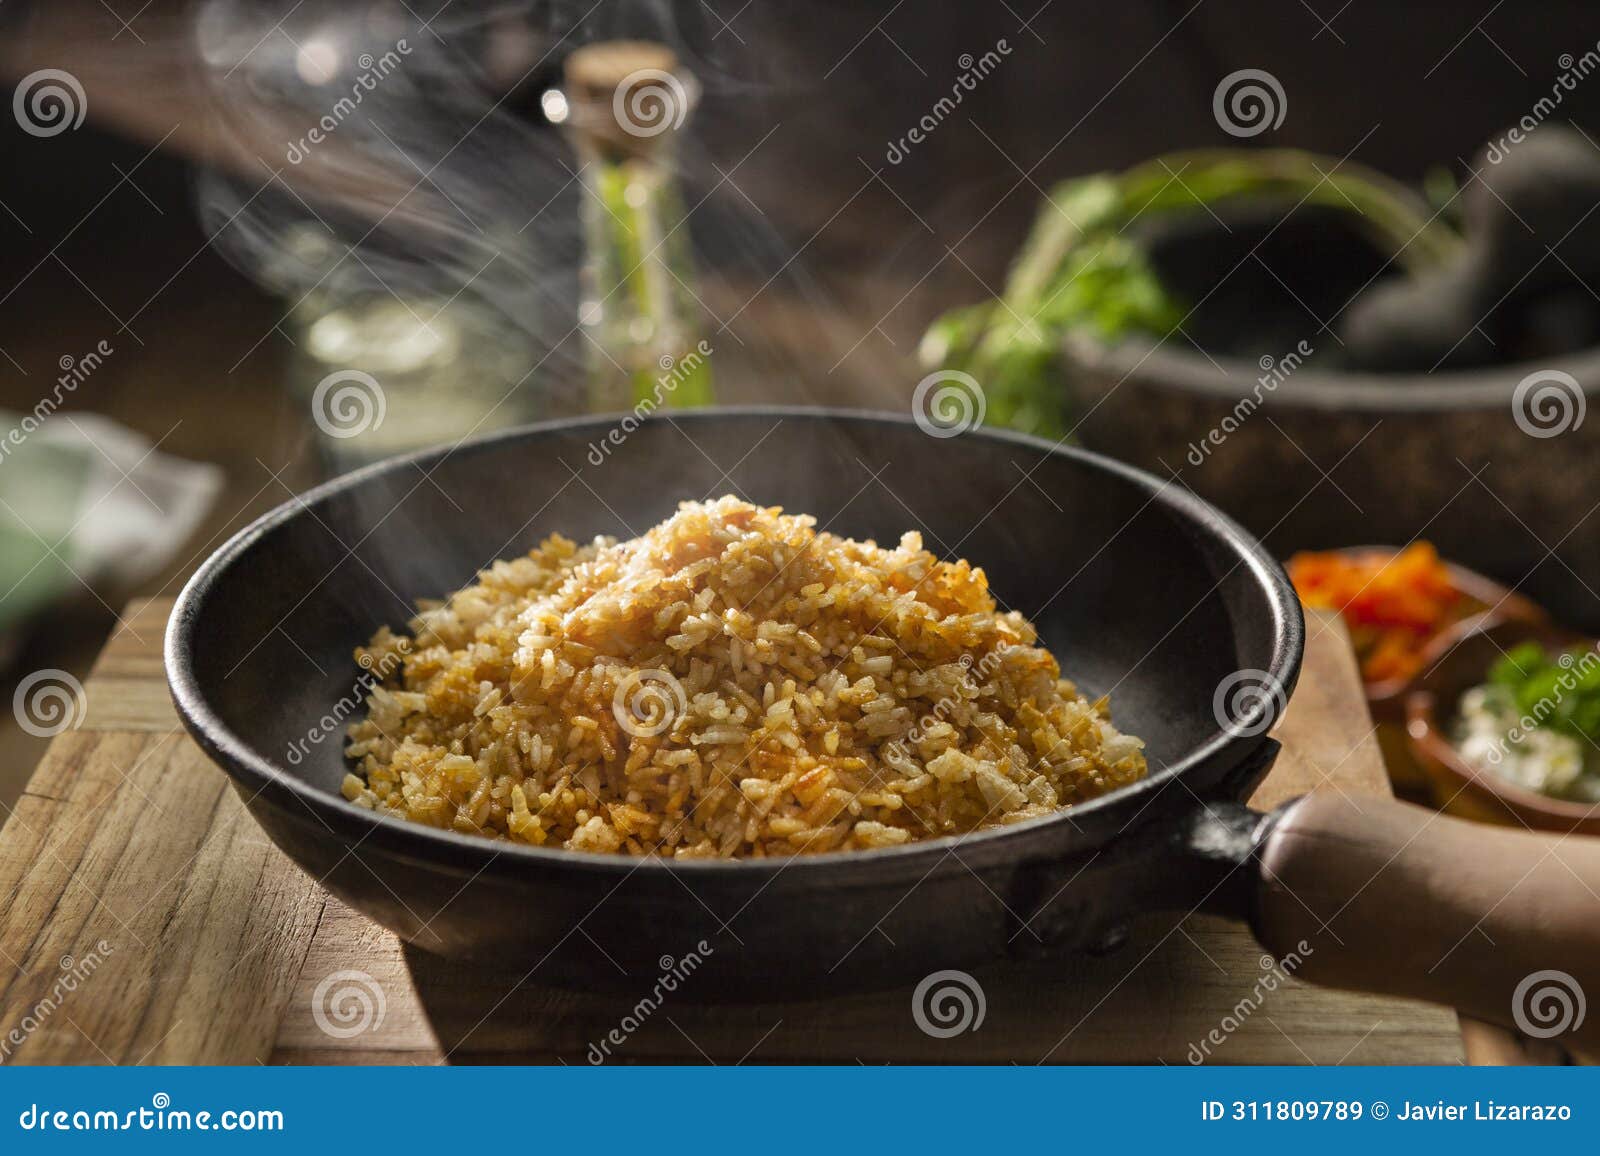 arroz con coco, traditional colombian dish. typical latin recipes with rice an fruits